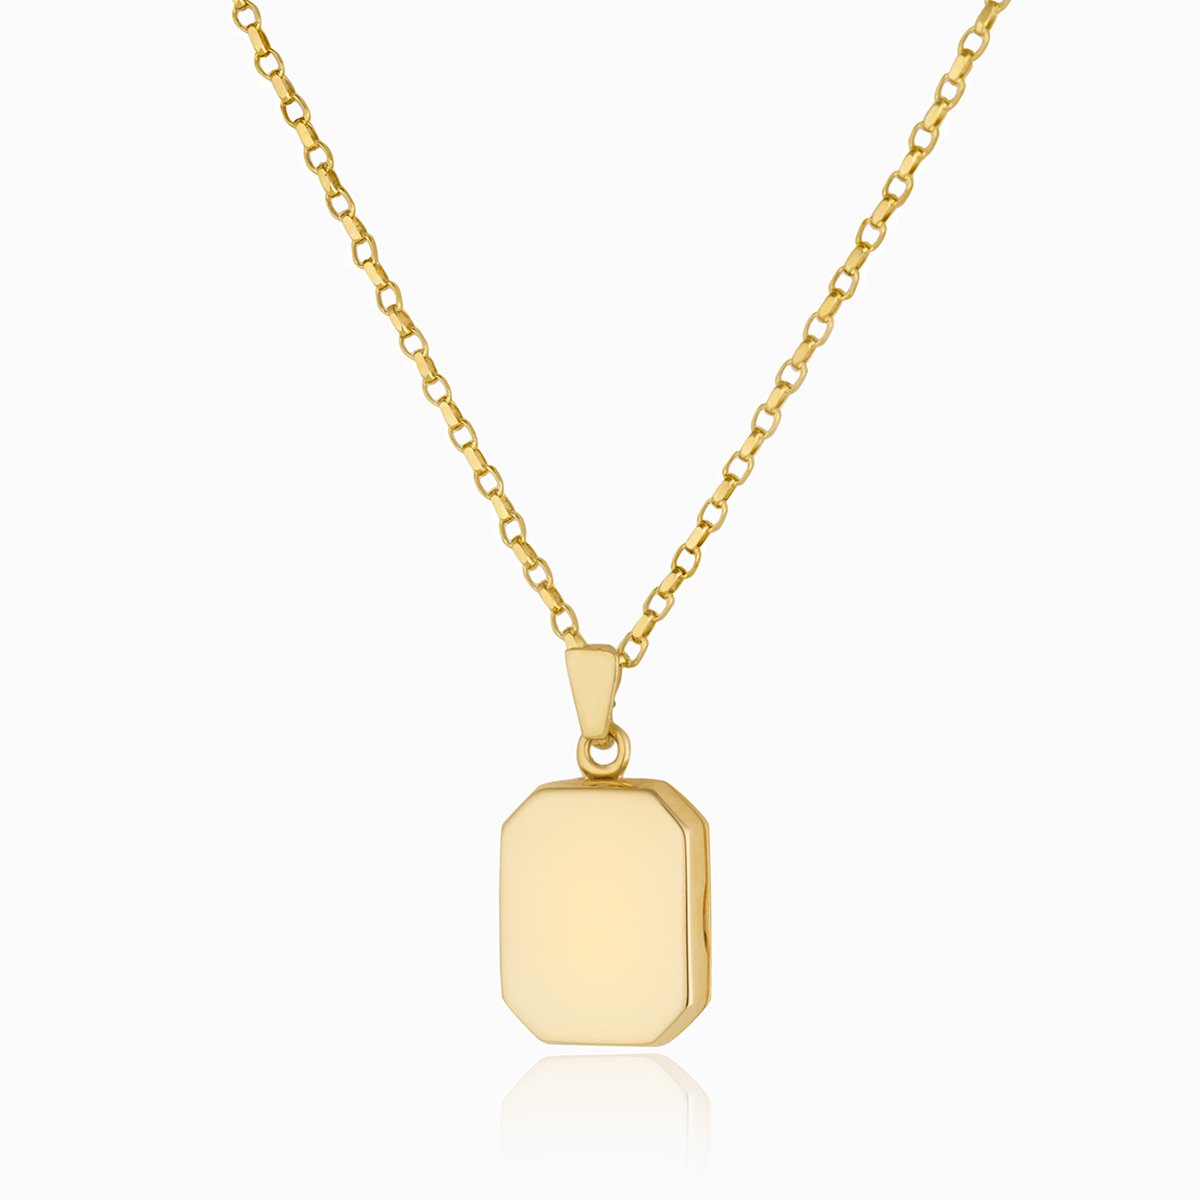 9 ct gold polished tabular shaped locket on a 9 ct gold belcher chain